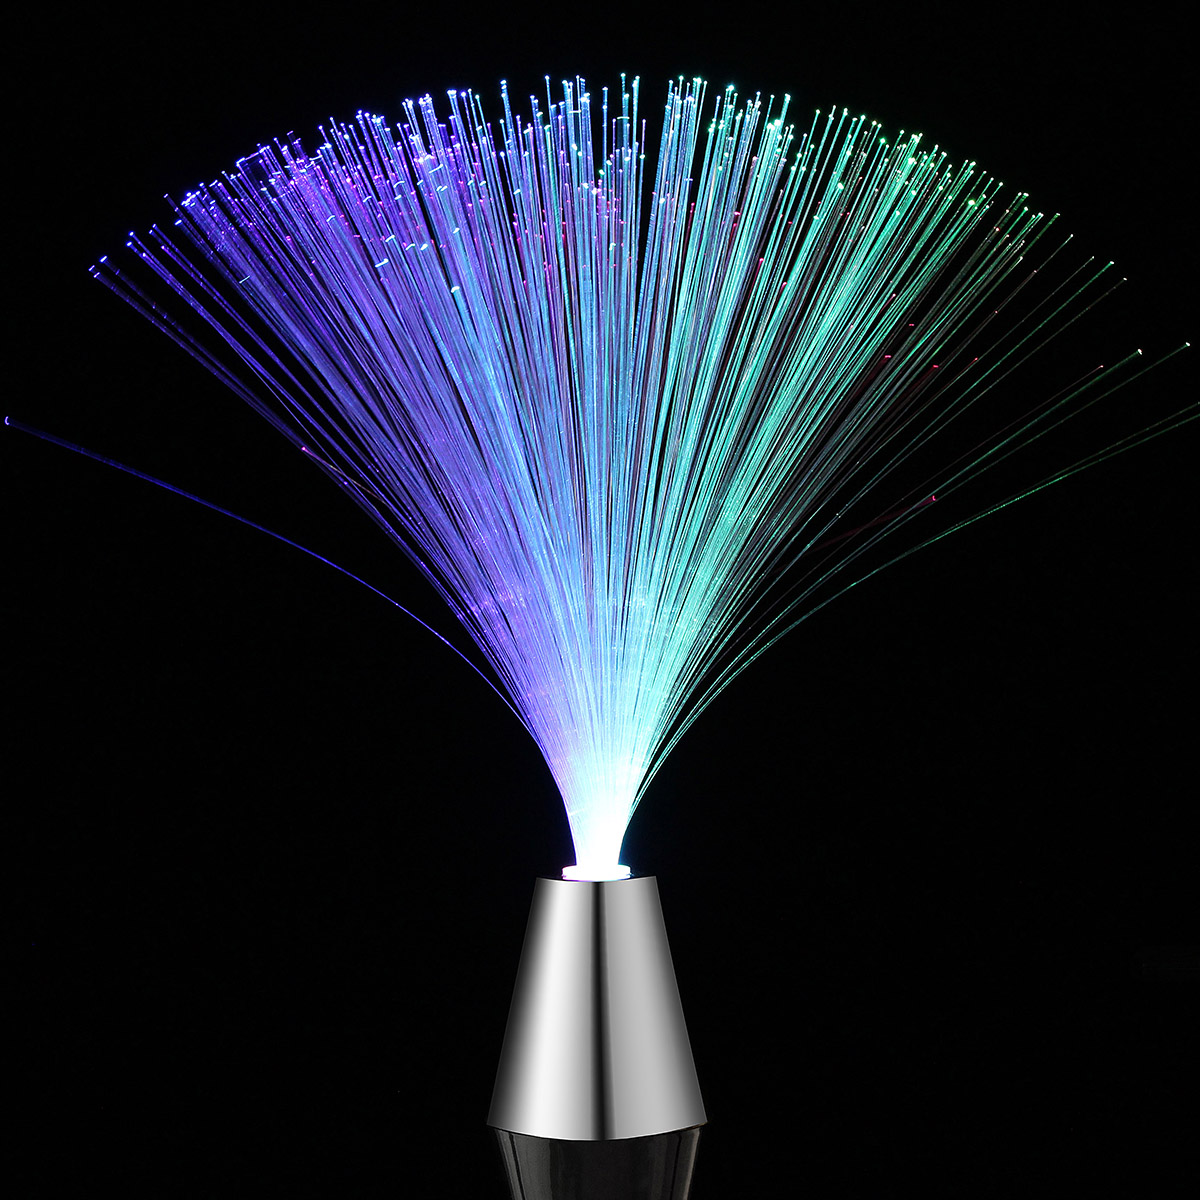 Fiber optic starlight color changing light, Buy 2 Get Extra 10% OFF